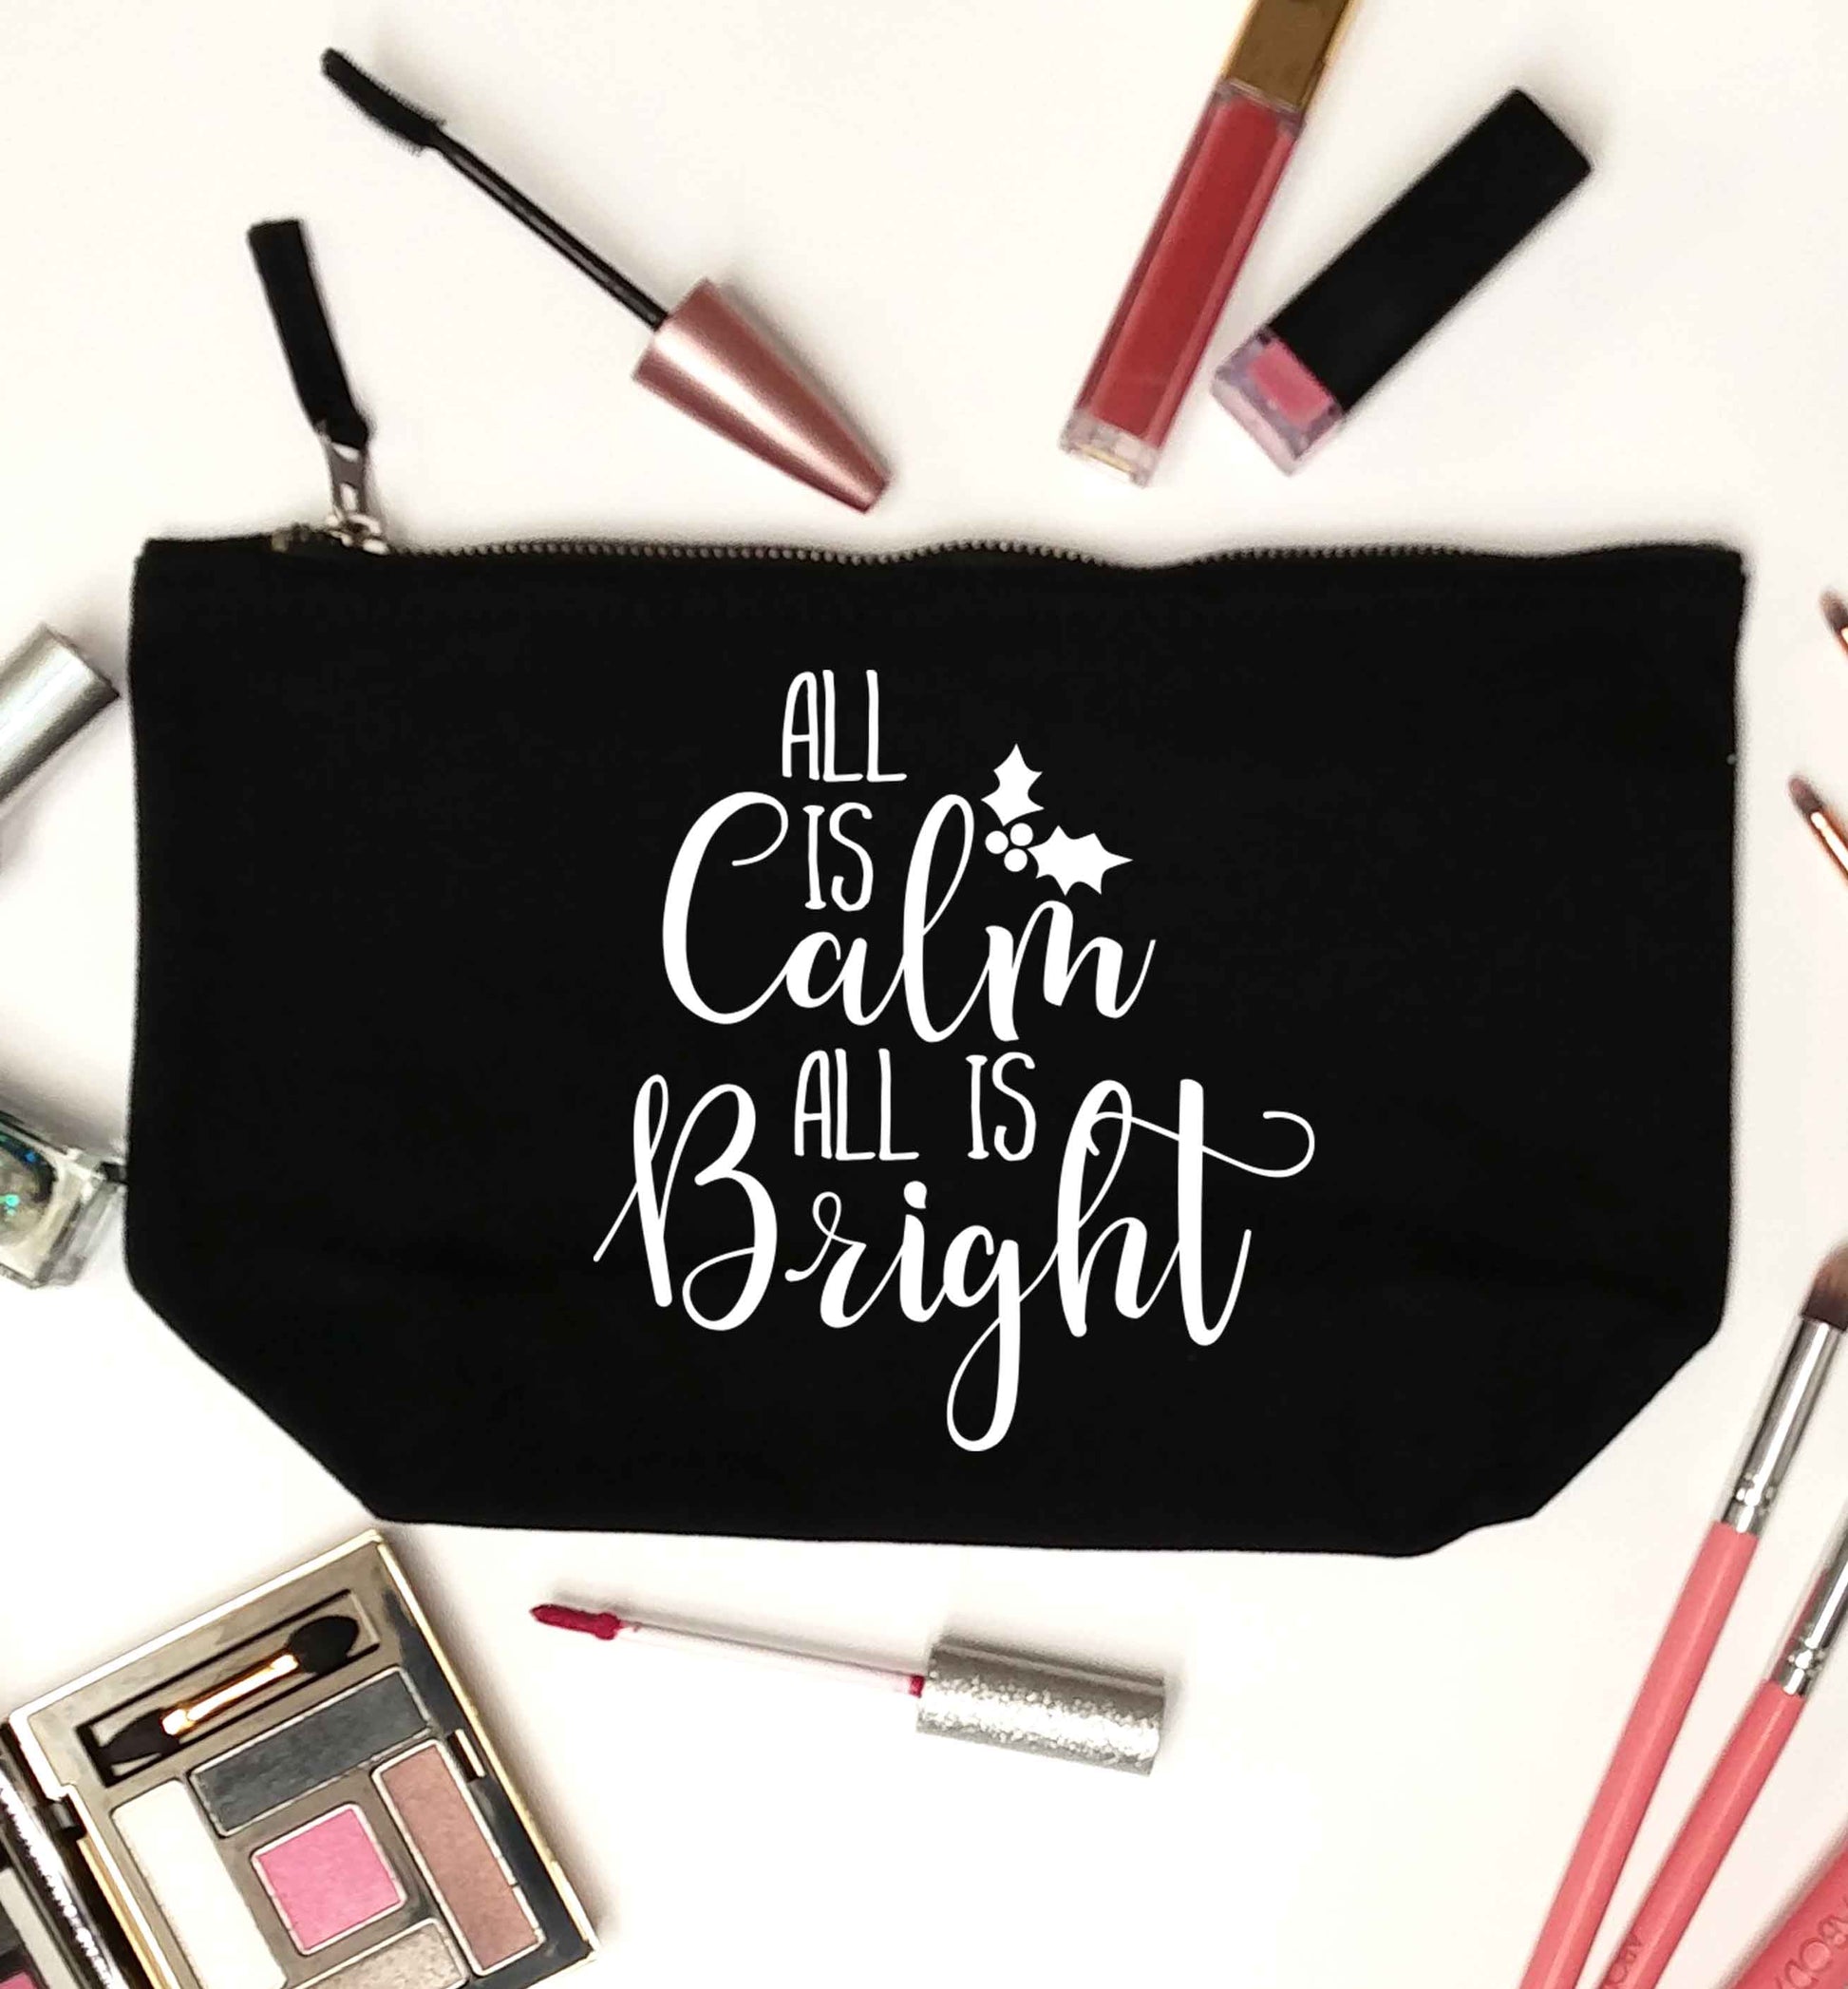 All is calm is bright black makeup bag